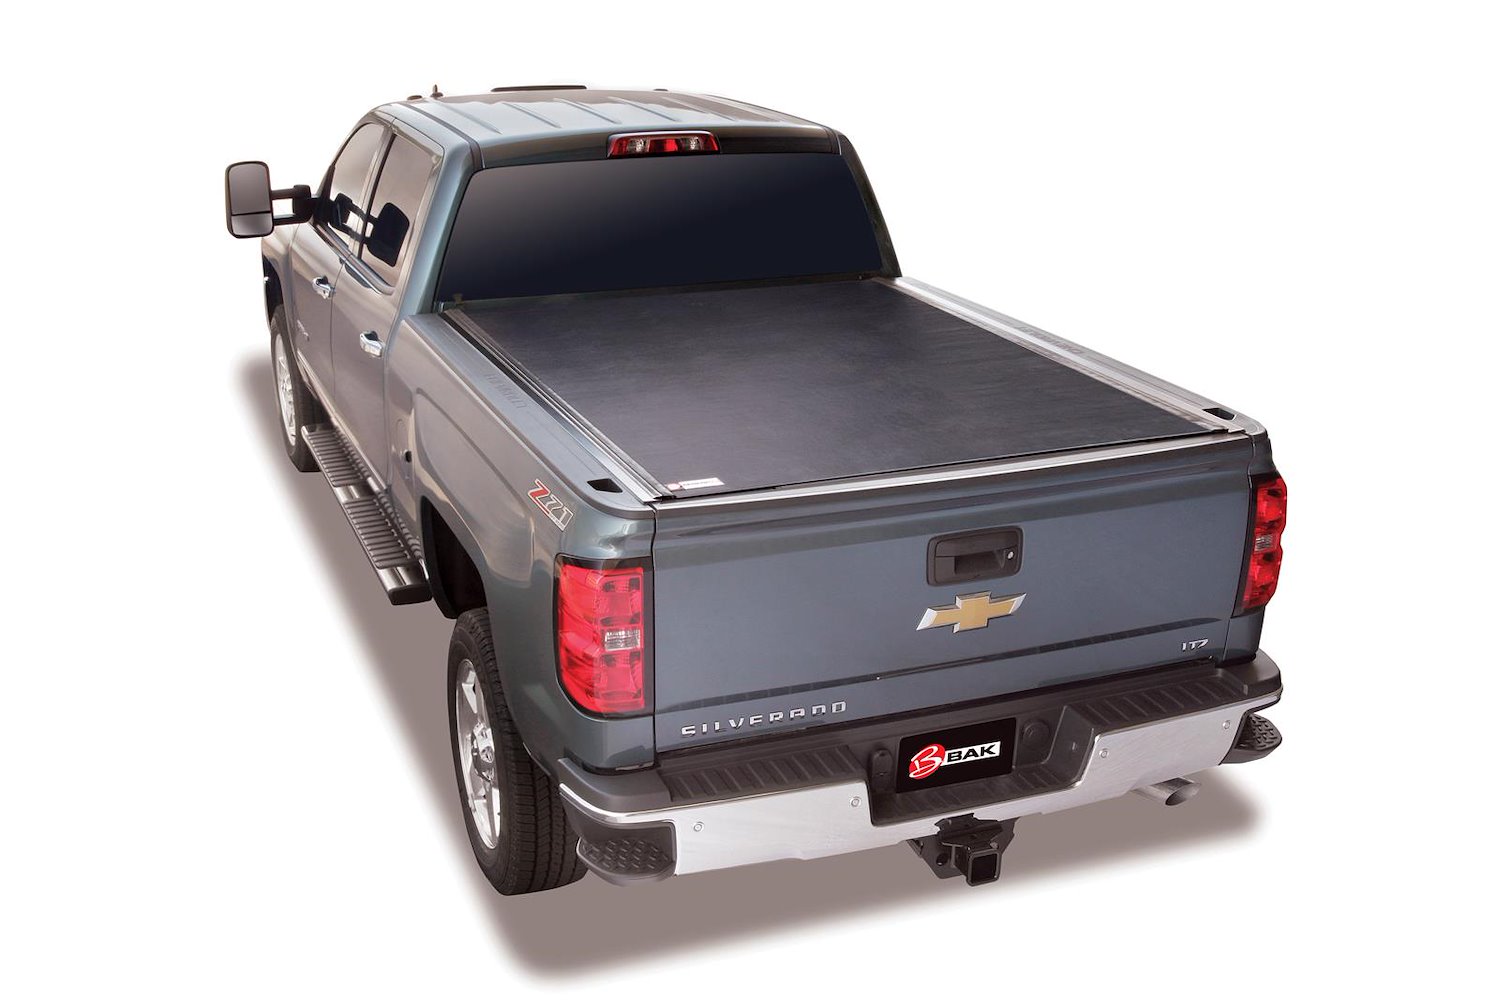 39121 Revolver X2 for 14-18 GM Silverado/Sierra/2019 Legacy/Limited 6.7 ft. Bed, Roll-Up Hard Cover Style [Black Finish]